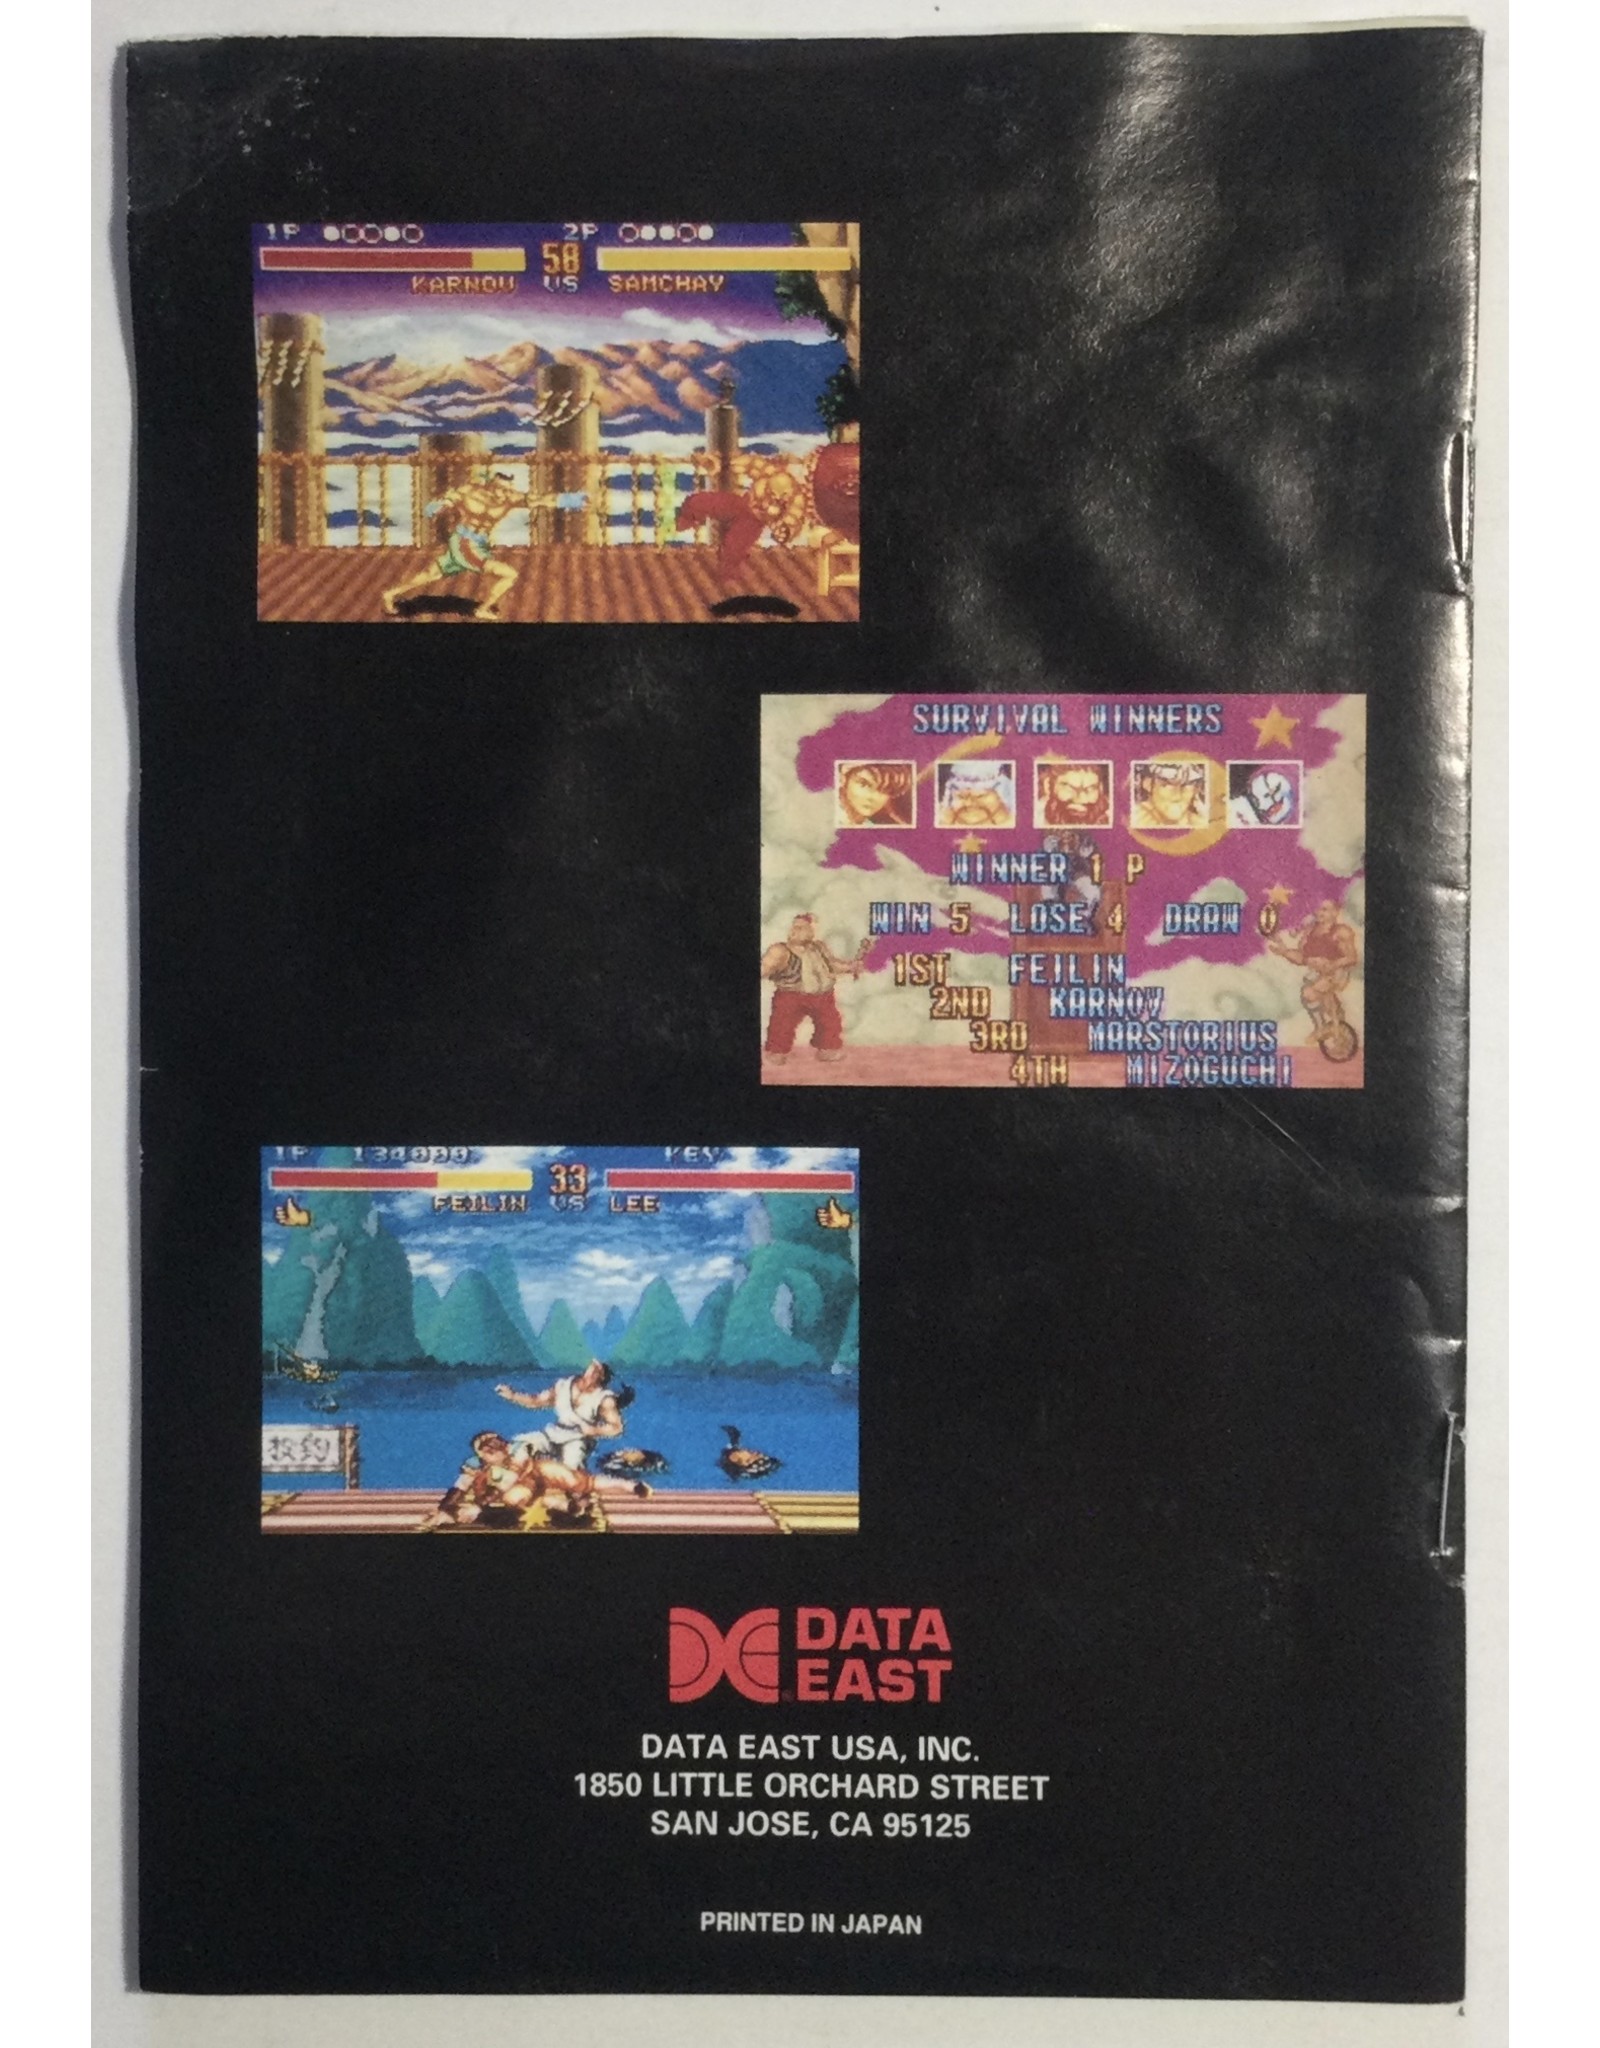 DATA EAST Fighter's History for Super Nintendo Entertainment System (SNES) - CIB